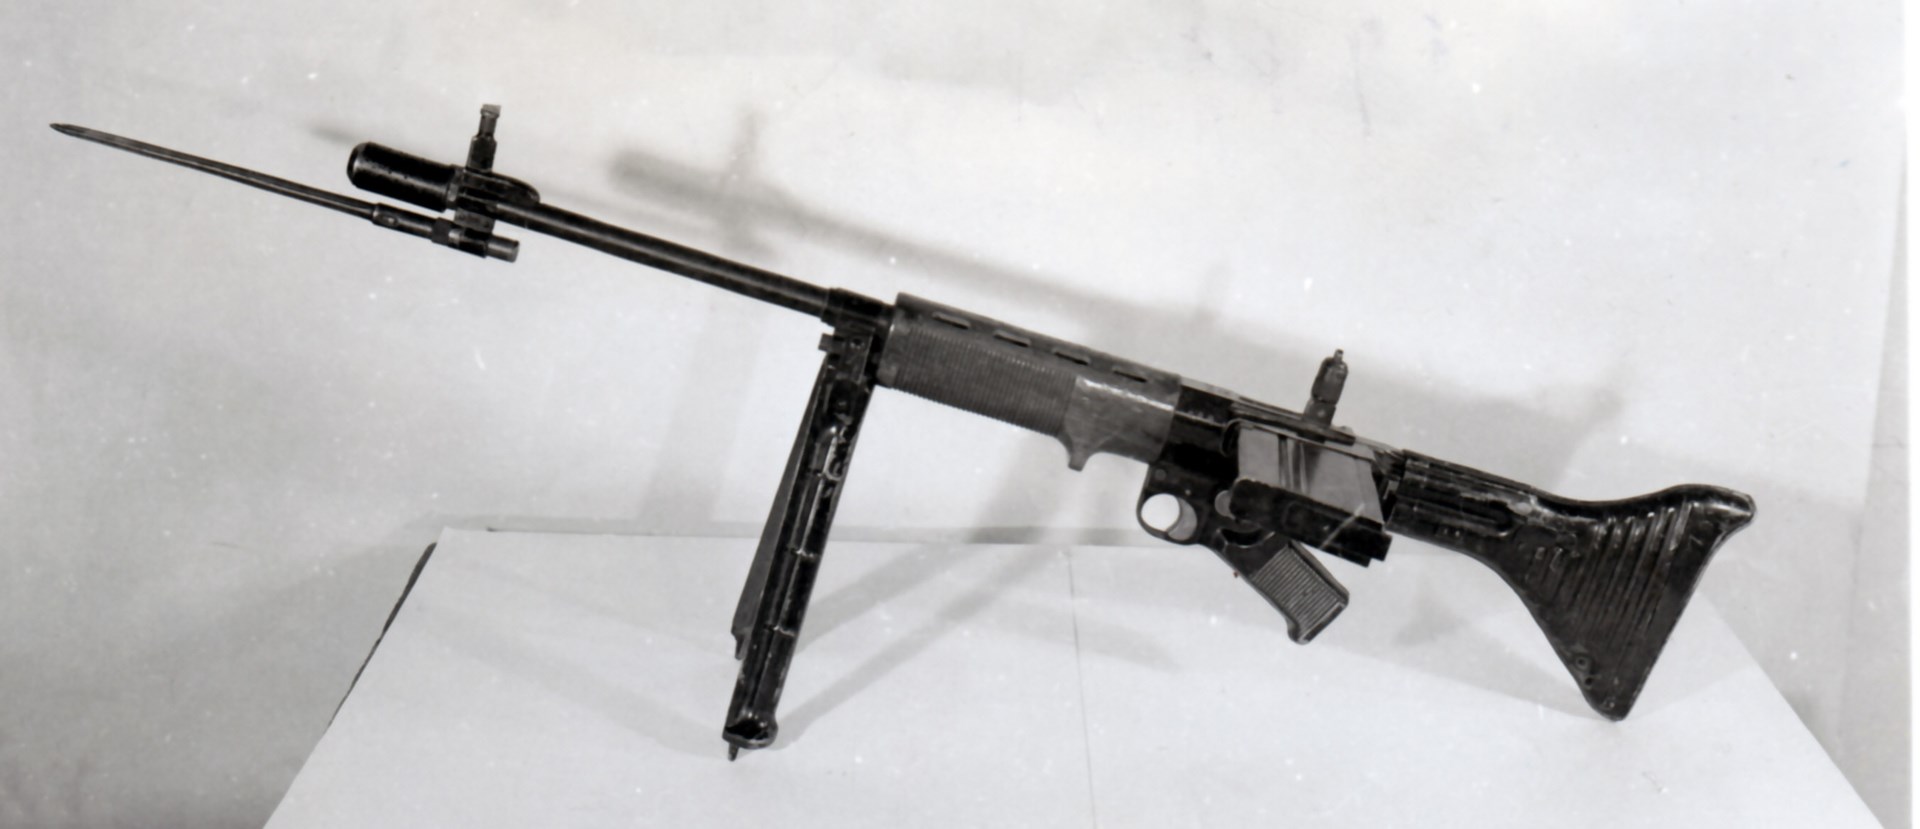 The FG42’s design allowed the user to top off an attached magazine. Author’s collection